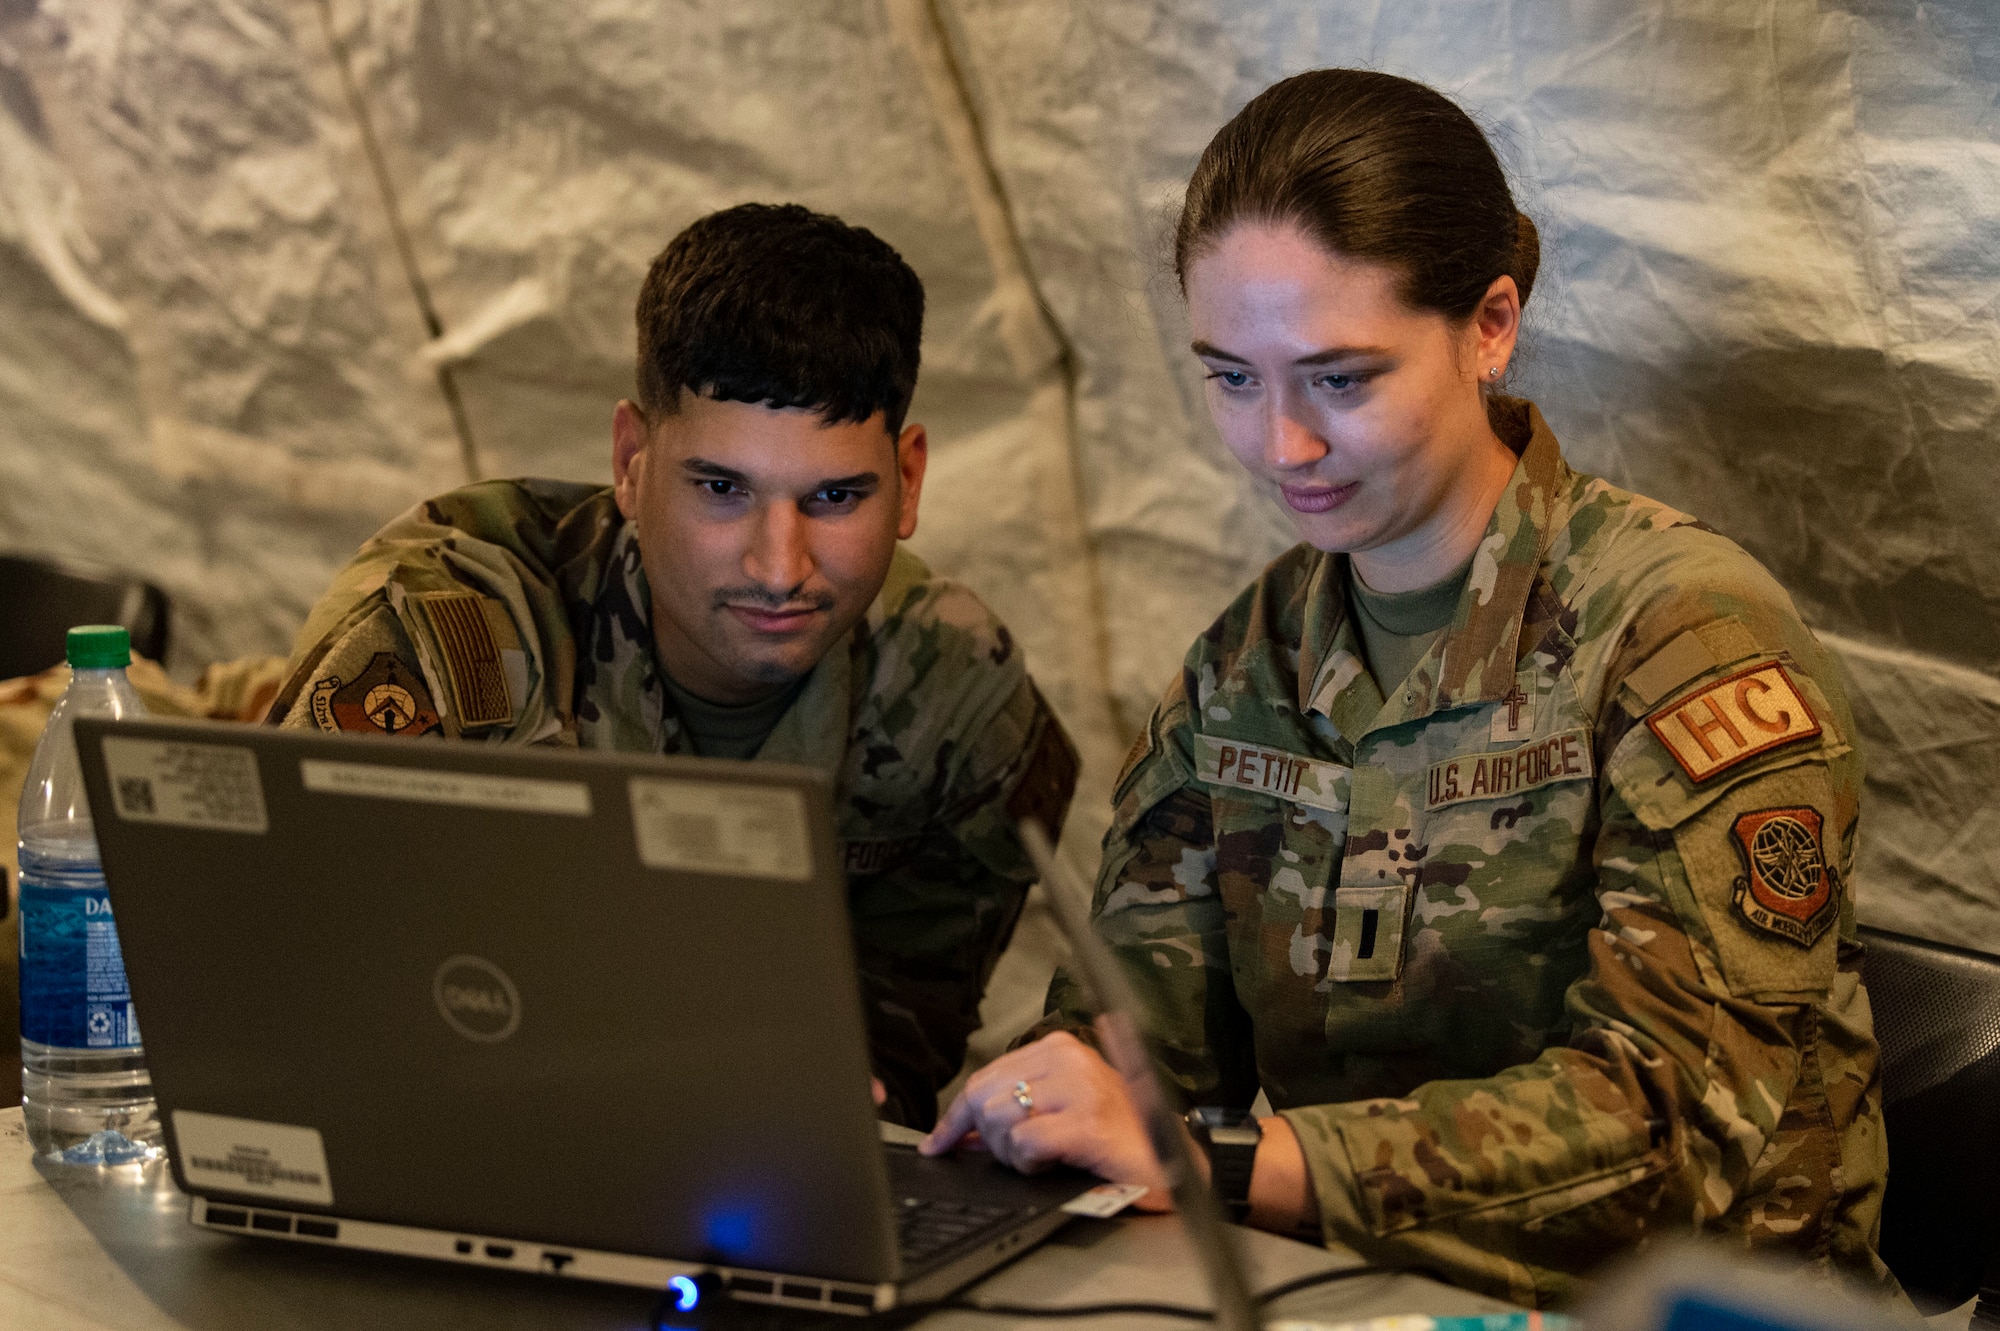 Tech. Sgt. Eric Feliciano, left, 512th Airlift Wing religious affairs airman, and 1st Lt. Rebecca Pettit, right, 436th Airlift Wing chaplain, check network connectivity during Liberty Eagle Readiness Exercise 2022 at Dover Air Force Base, Delaware, July 13, 2022 at Dover Air Force Base, Delaware, July 13, 2022. The 436th and 512th Airlift Wings tested their ability to generate, employ and sustain airpower across the world in a contested and degraded operational environment. (U.S. Air Force photo by Roland Balik)